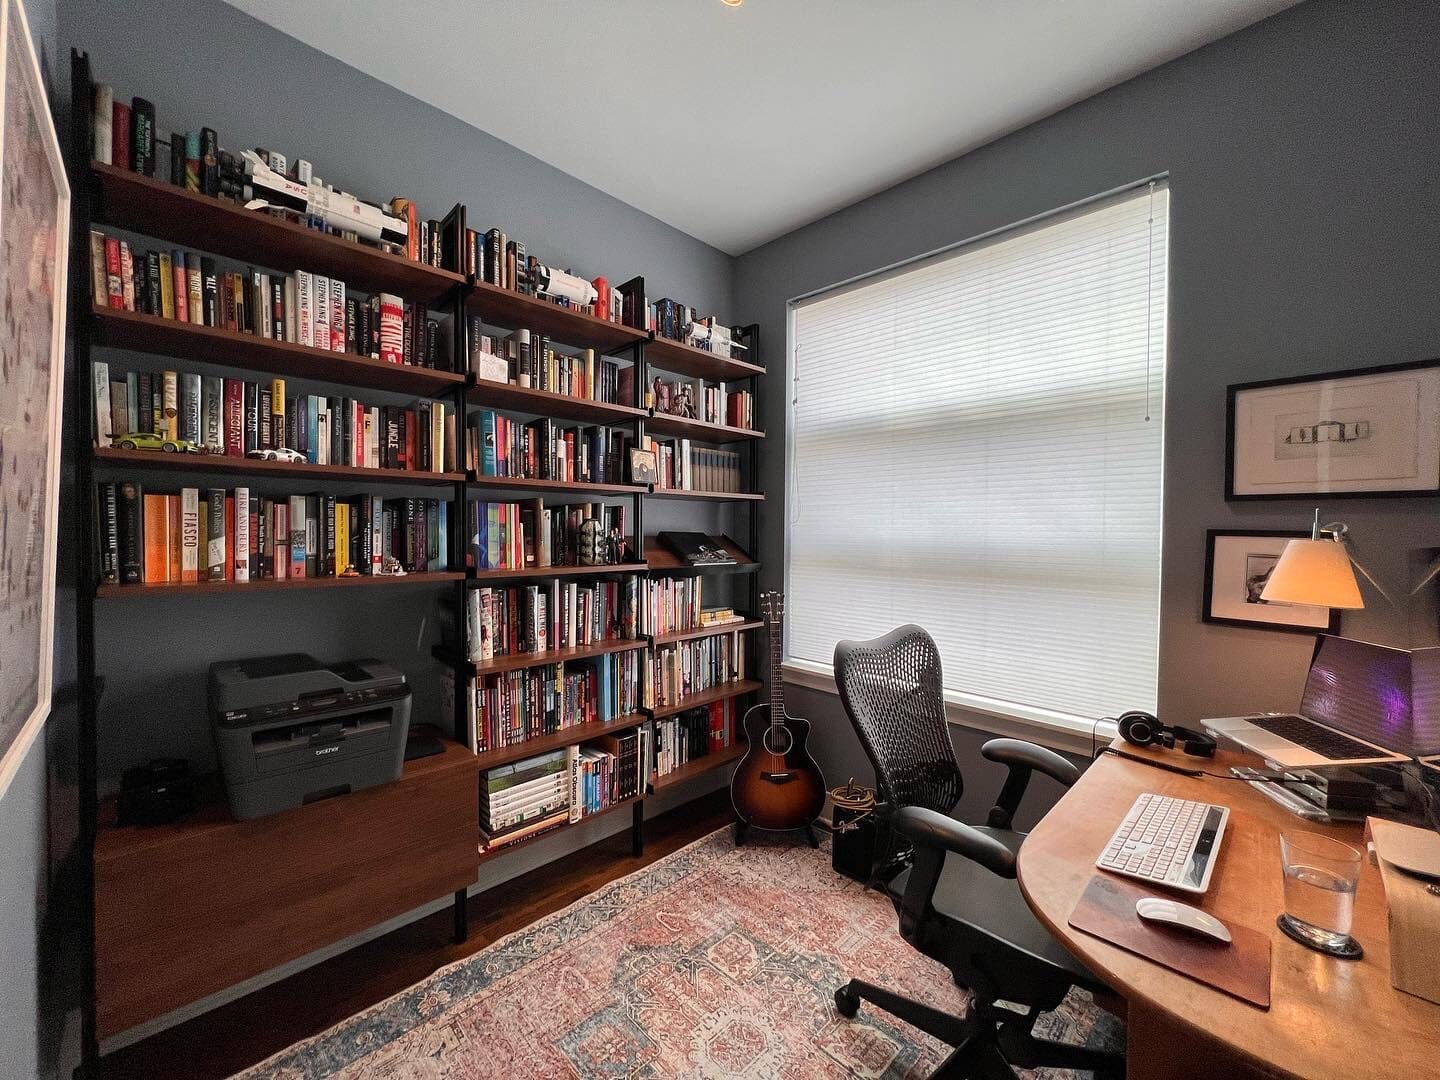 Ikea Upgrade: Improving a Home Office Space